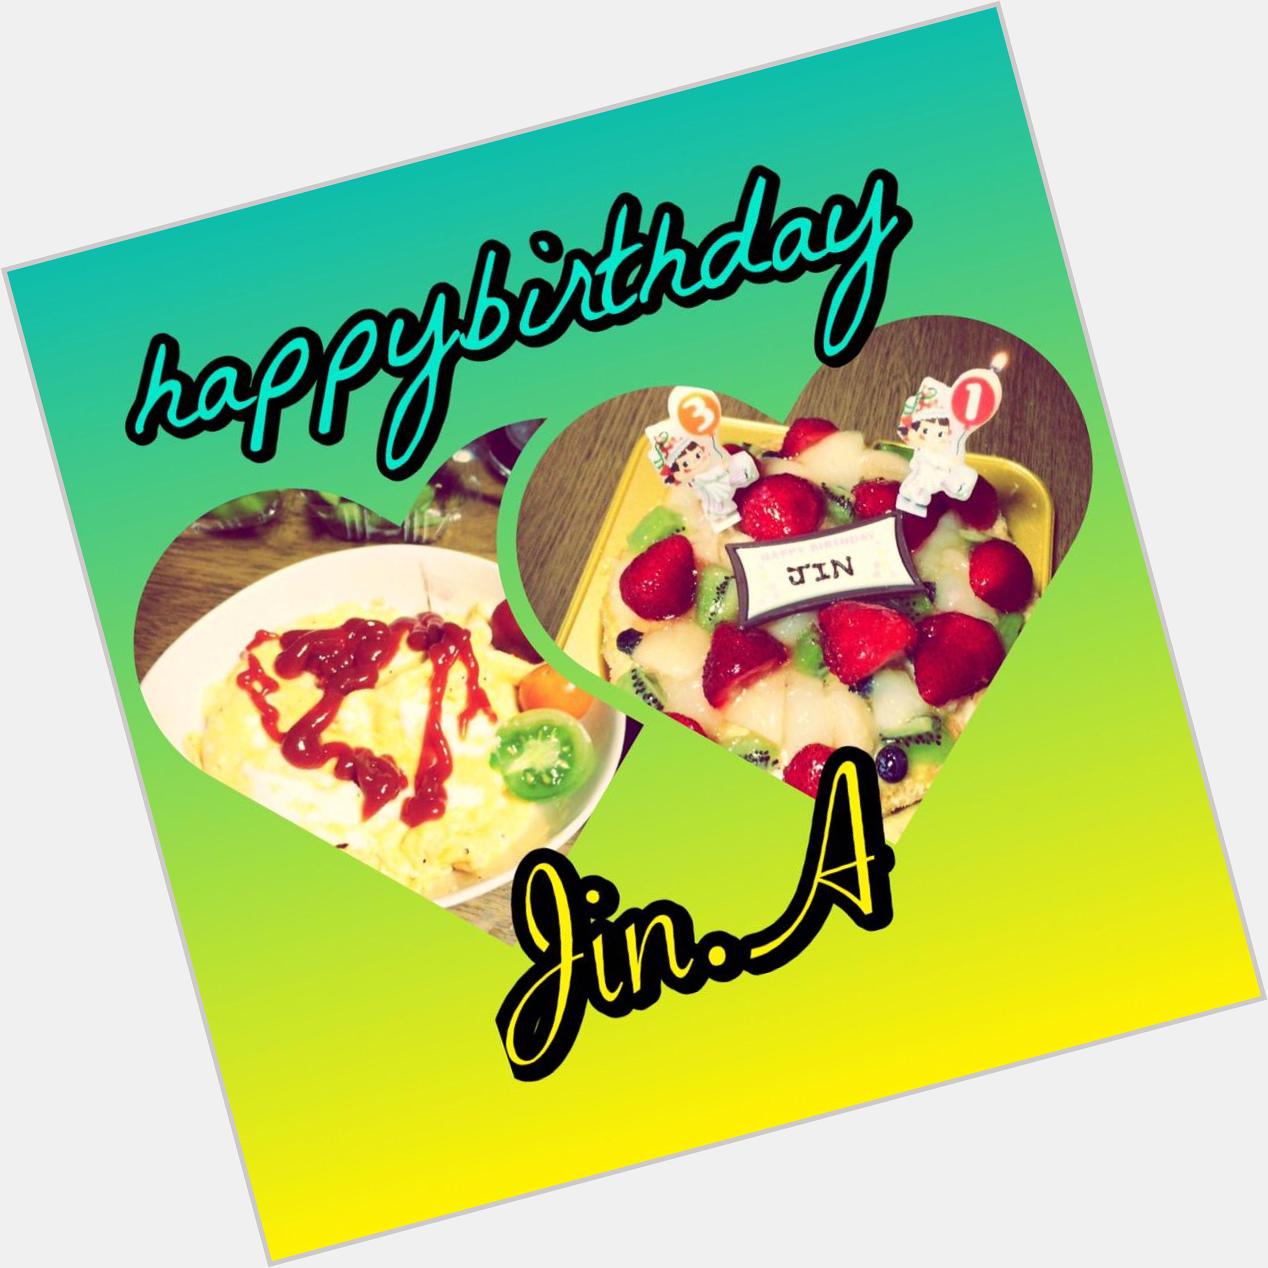  happy birthday!!Jin!!
31       happy jindependence day  1th anniversary (   *)  *                  